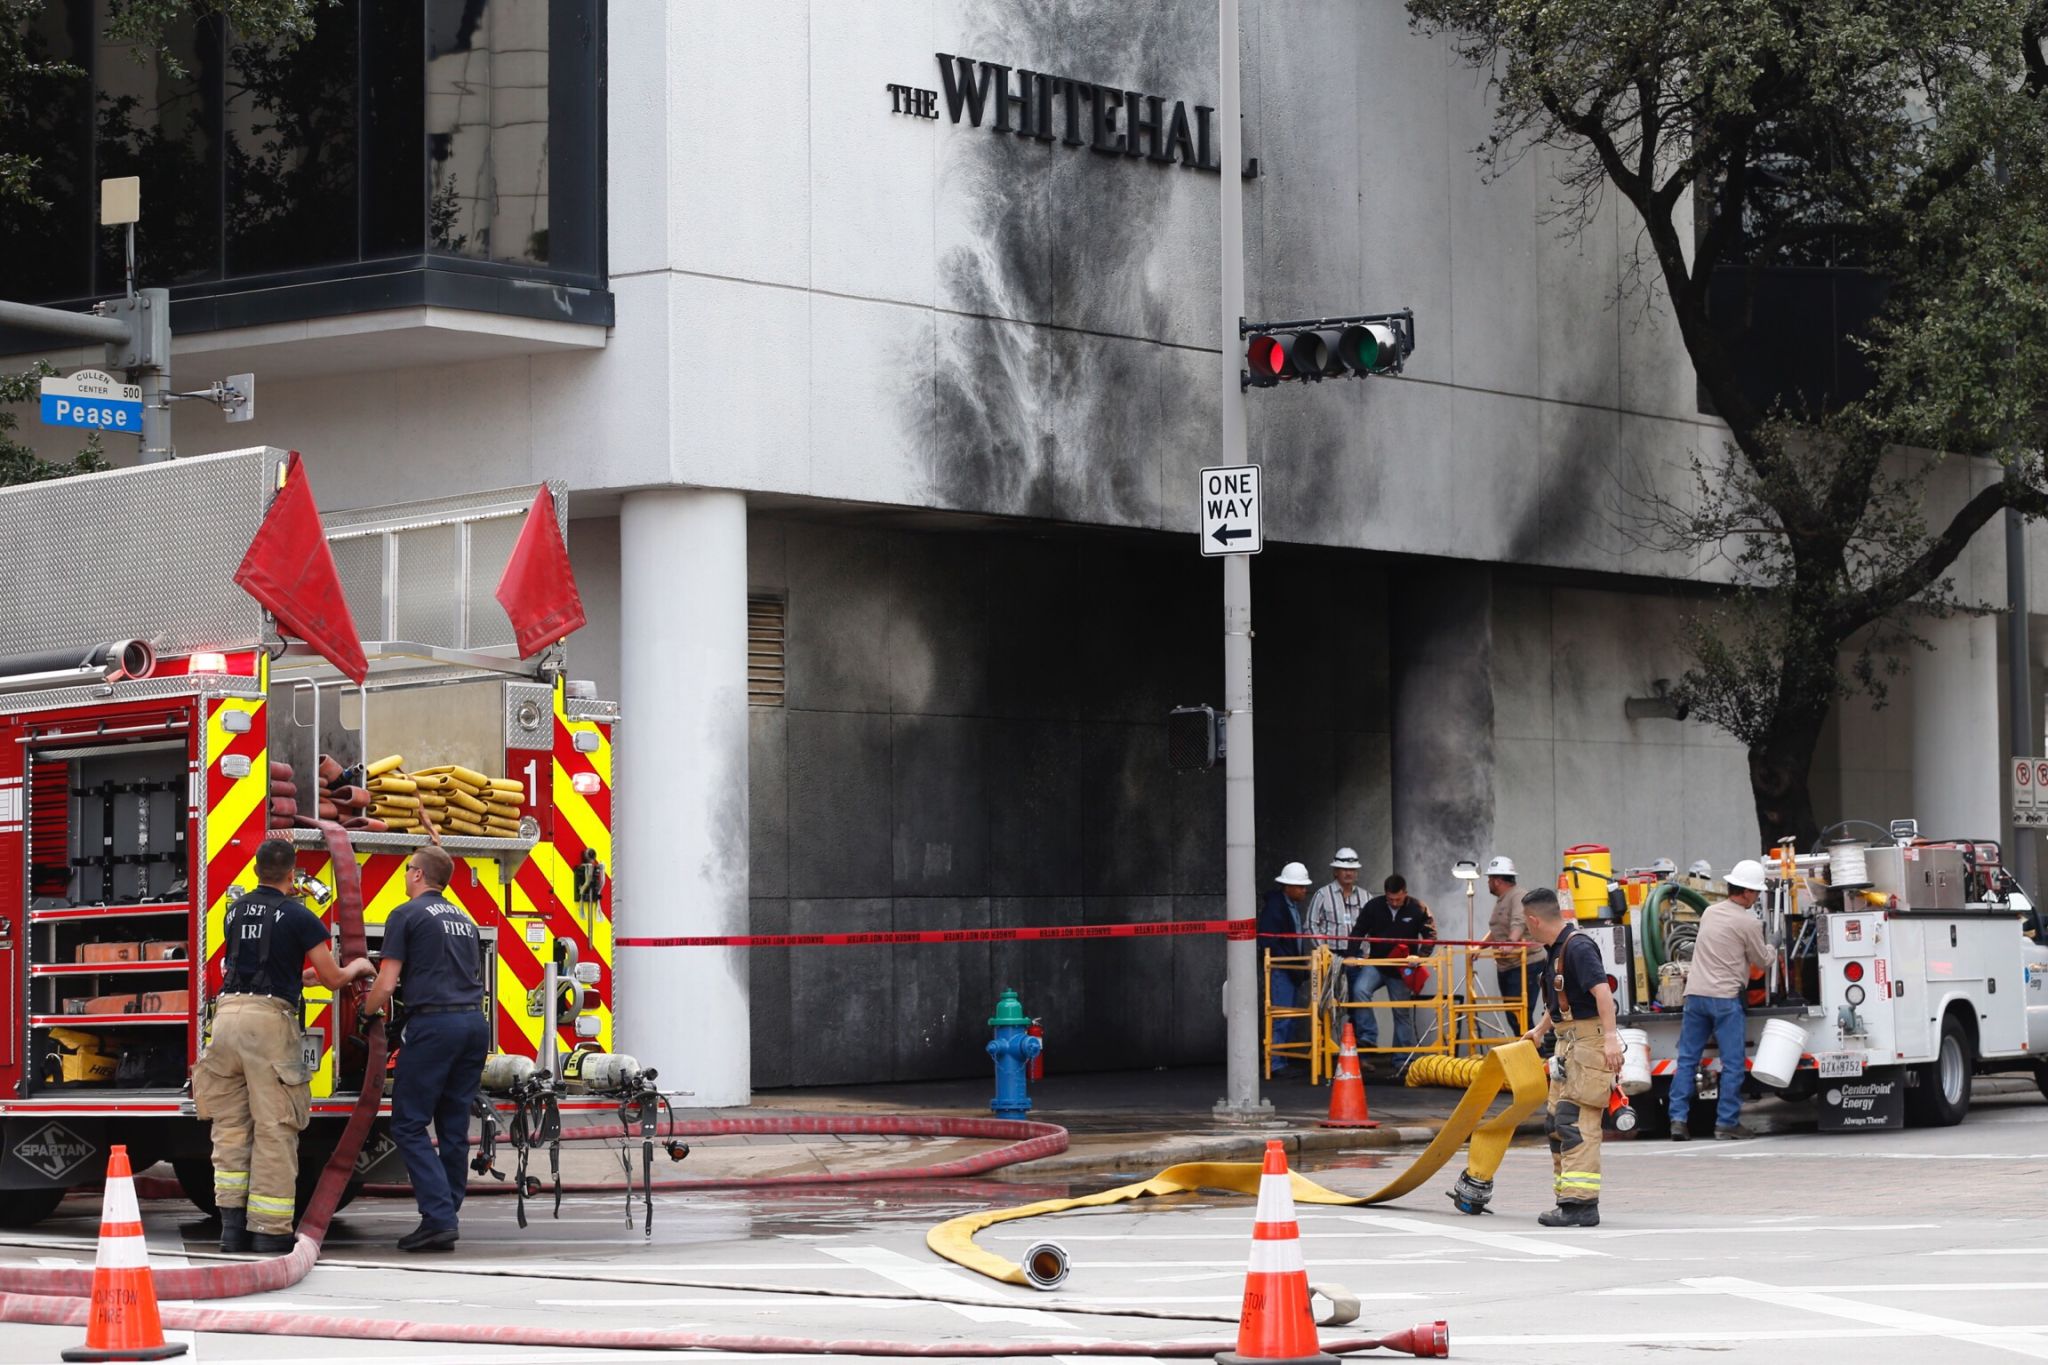 Explosion reported at hotel in downtown Houston - Houston Chronicle2048 x 1365